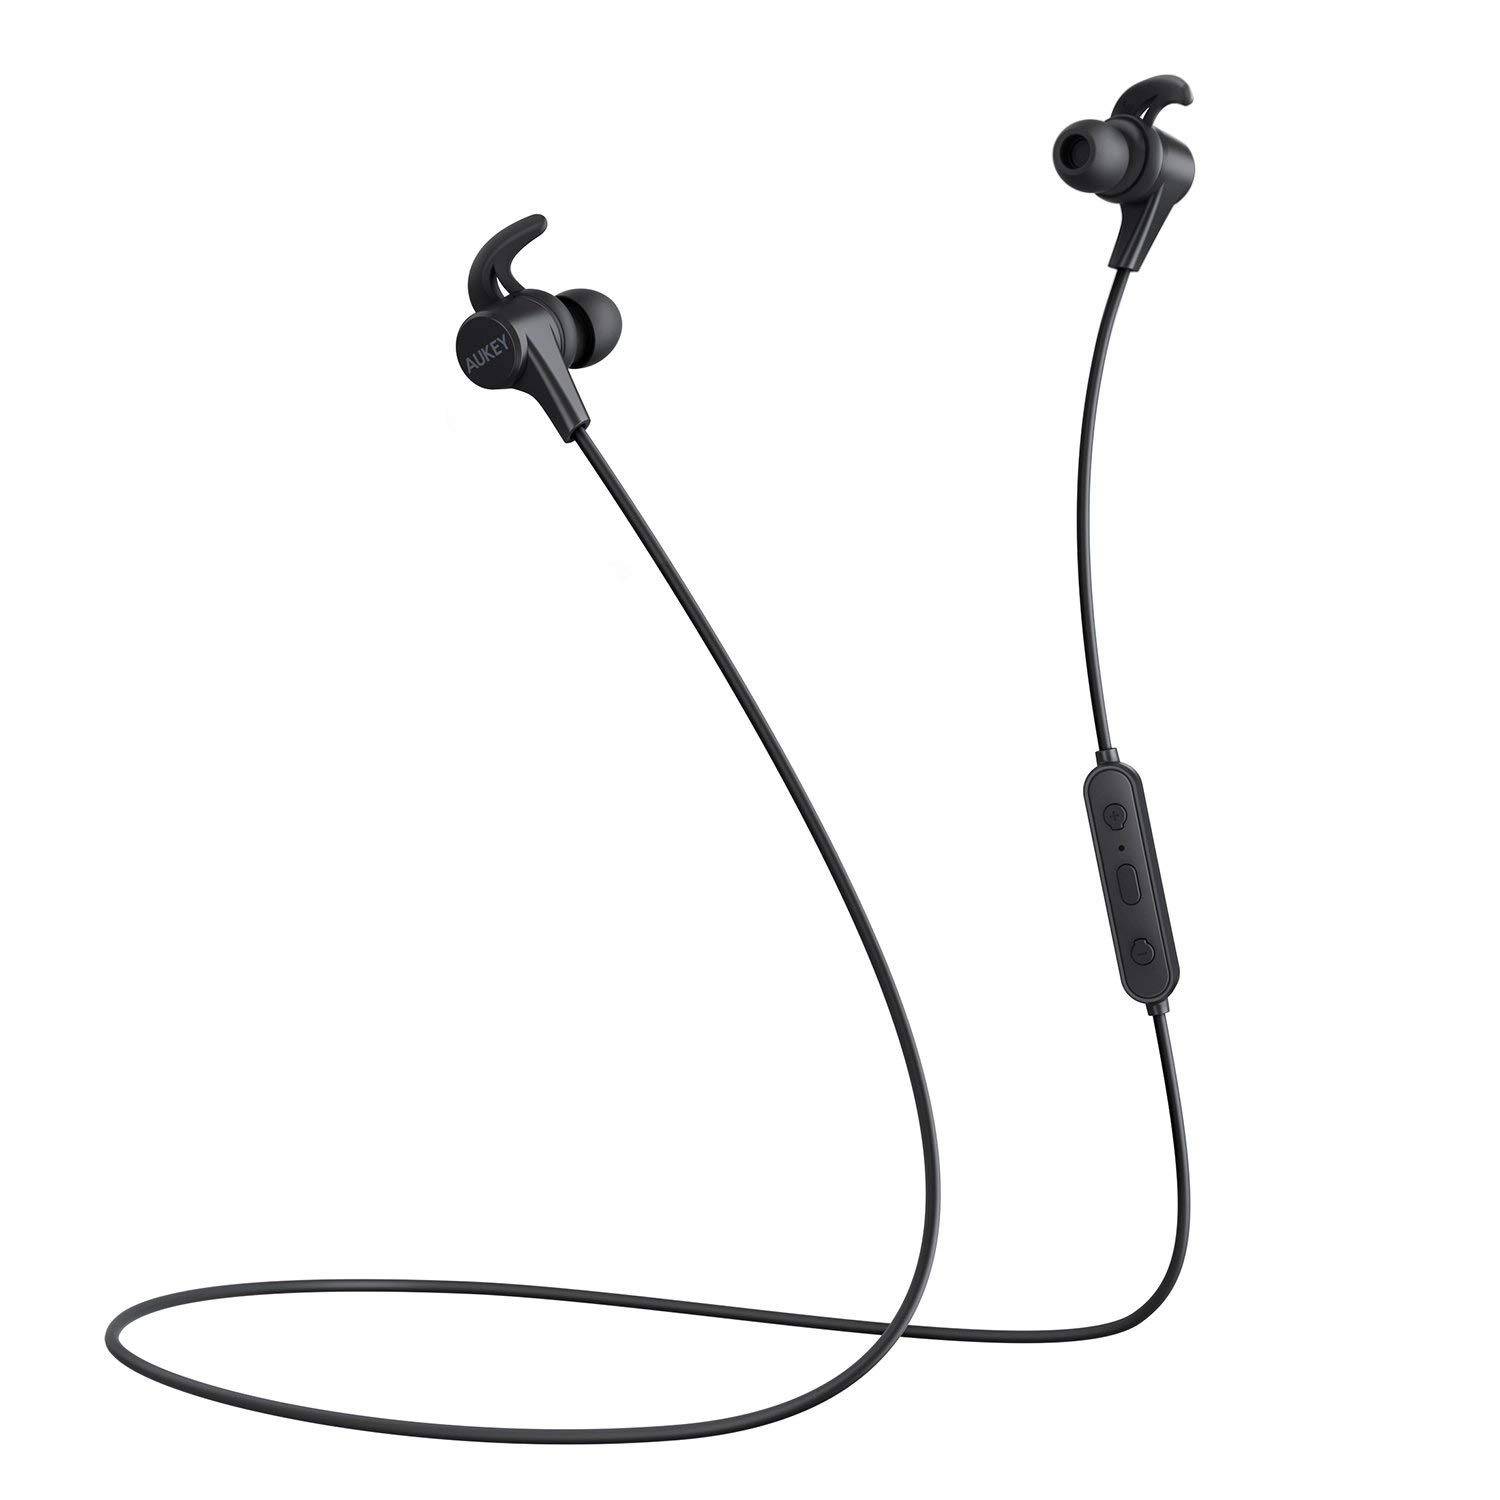 AUKEY Wireless Headphones, 3 EQ Sound Modes, aptX and Sweat-Resistant Nano Coating, Secure Fit Bluetooth Sports Earbuds, 8-Hour Battery Life